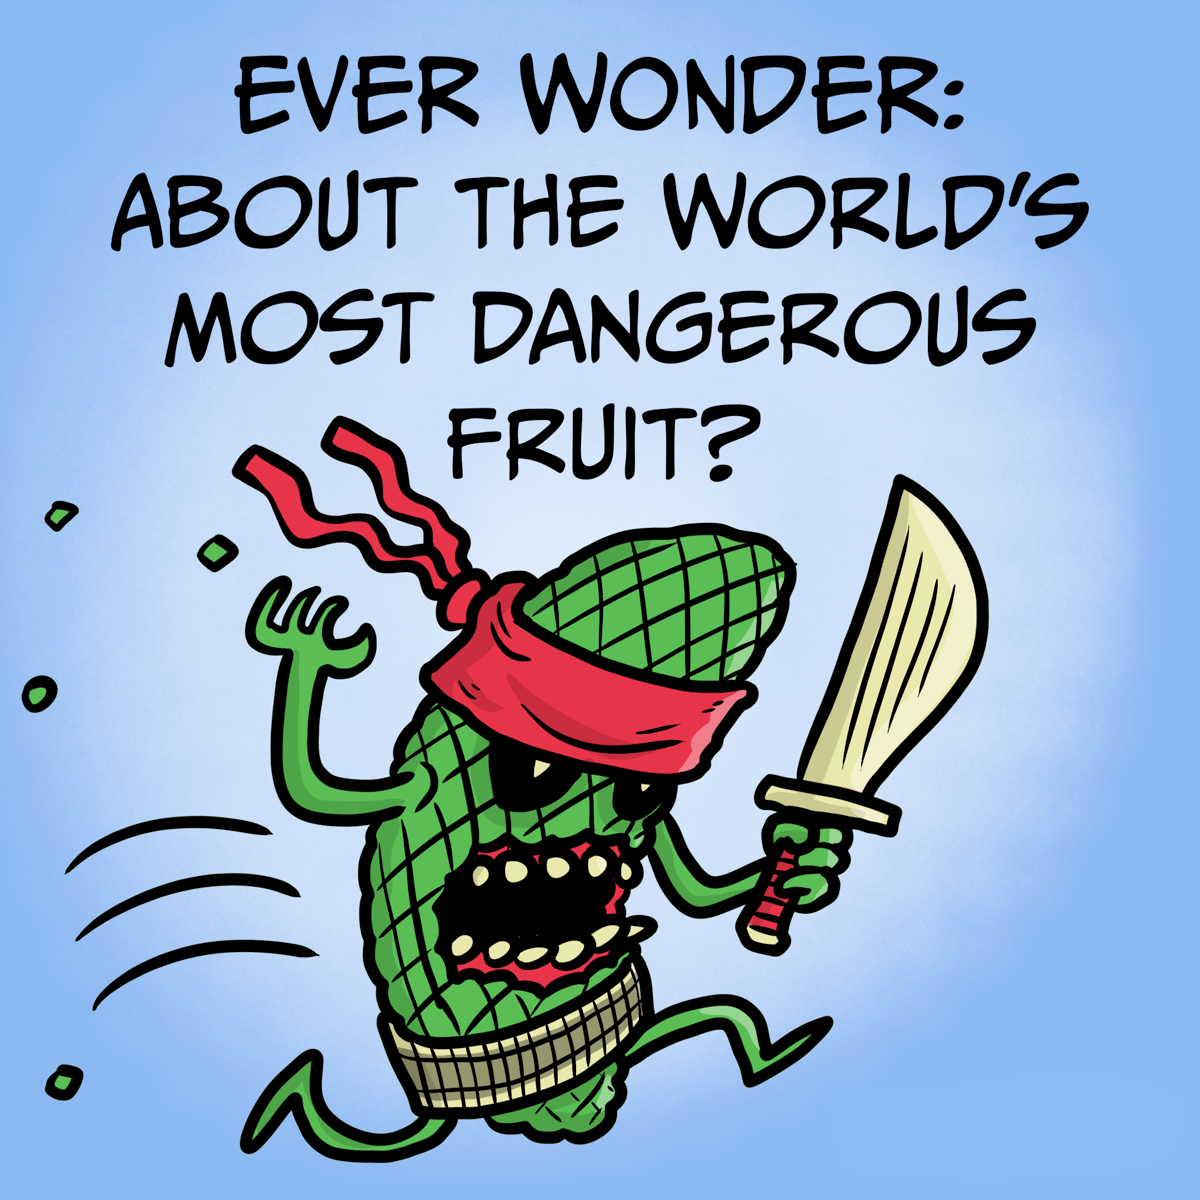 Ever Wonder? About the Most Dangerous Fruit in the World?